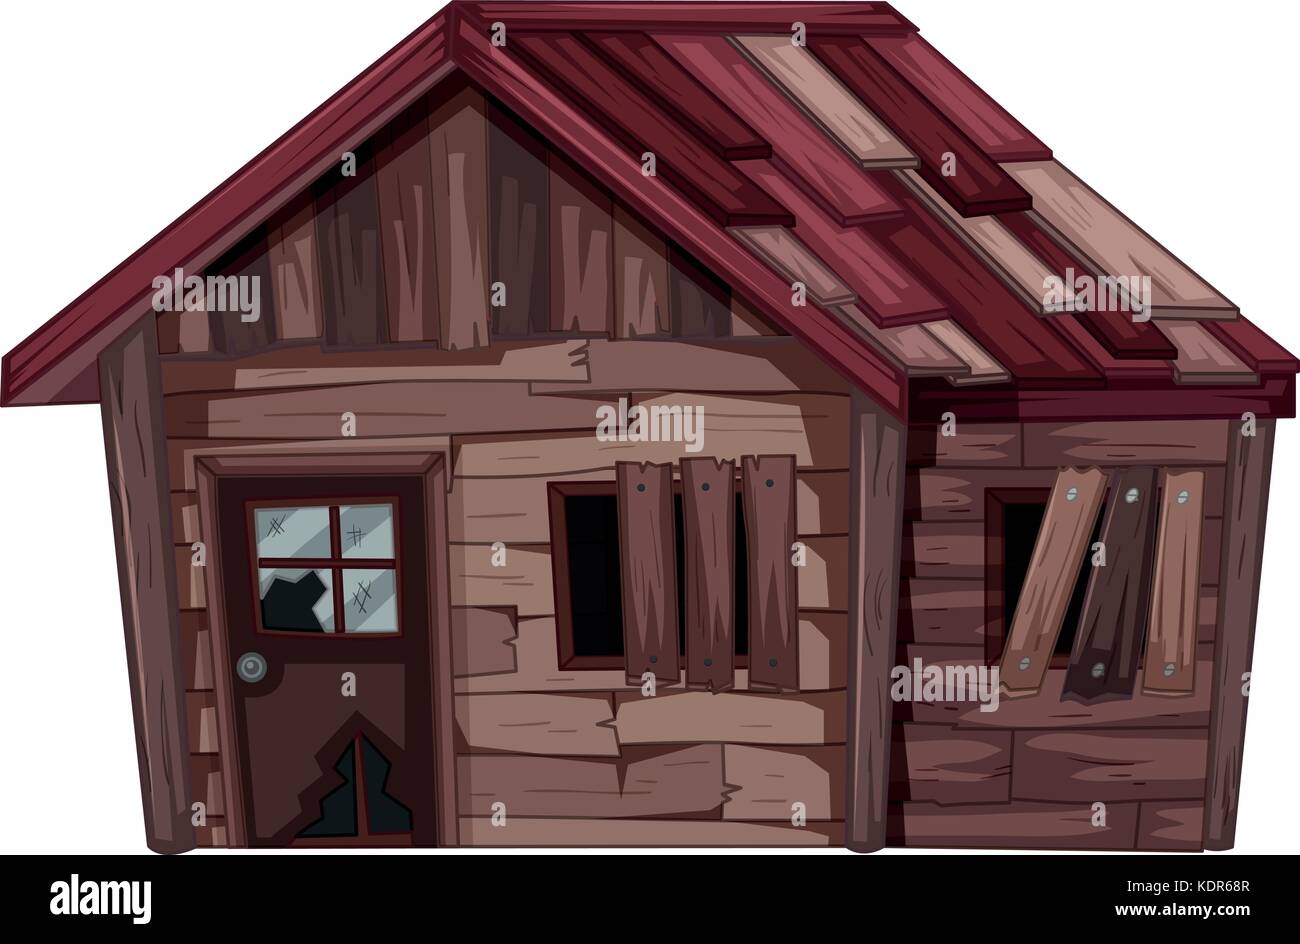 Old wooden house in bad condition illustration Stock Vector